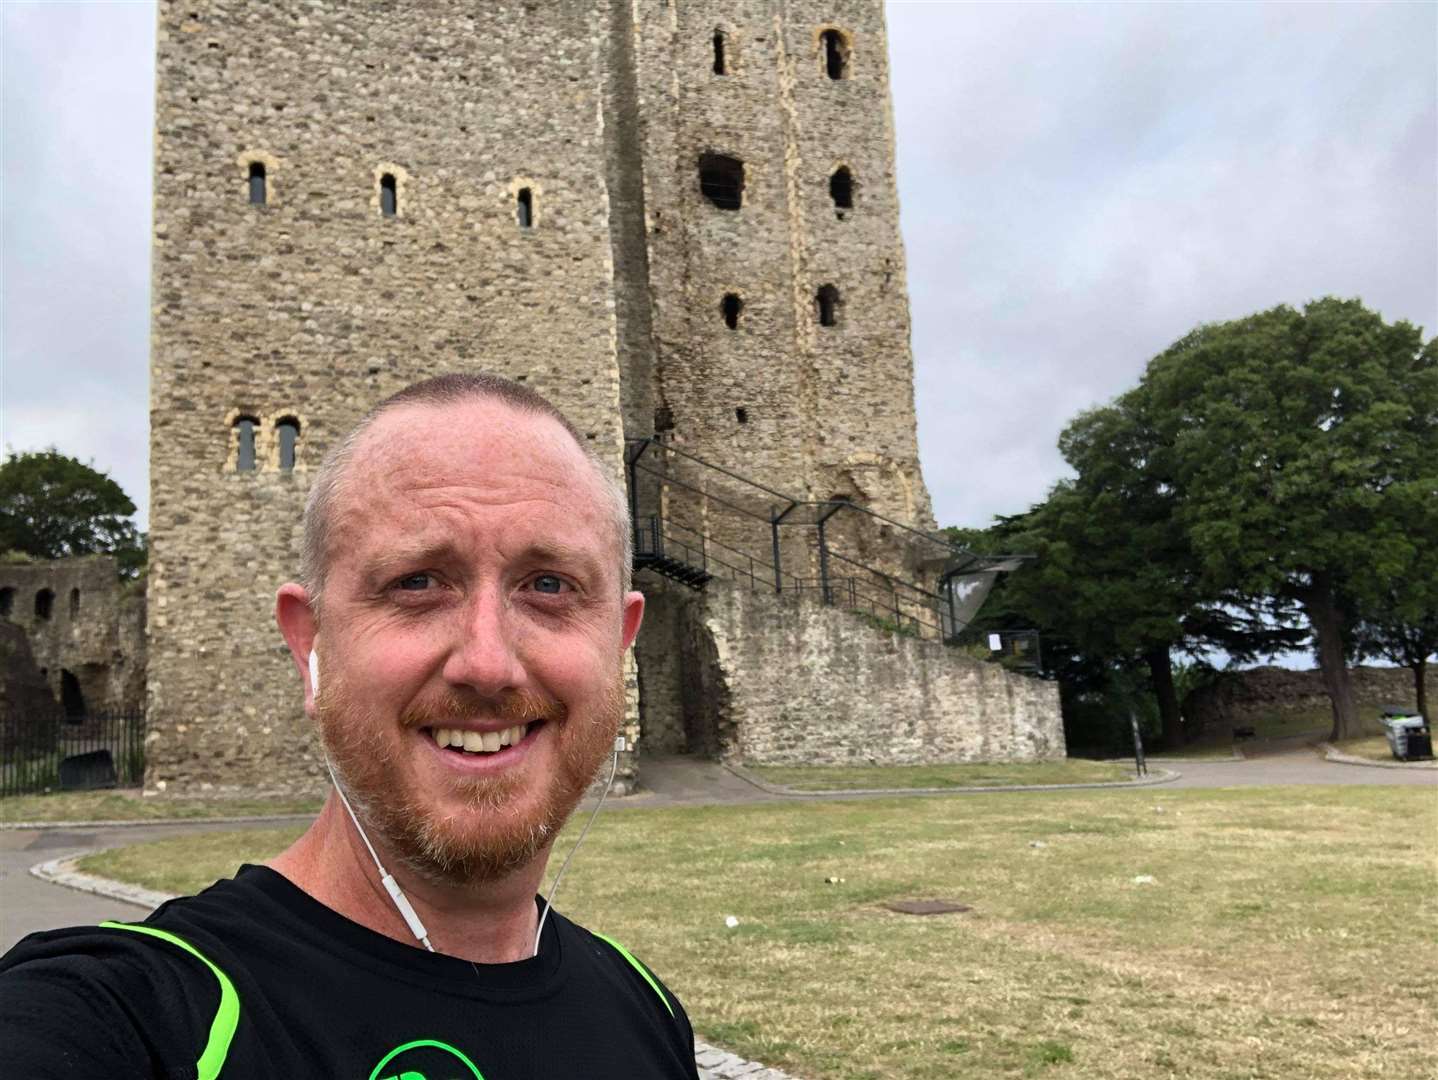 We featured runner Paul Beaney when he completed an unexpected marathon distance around Medway back in August, and he even had time for a selfie at Rochester Castle. Maybe he'll enter the competition?